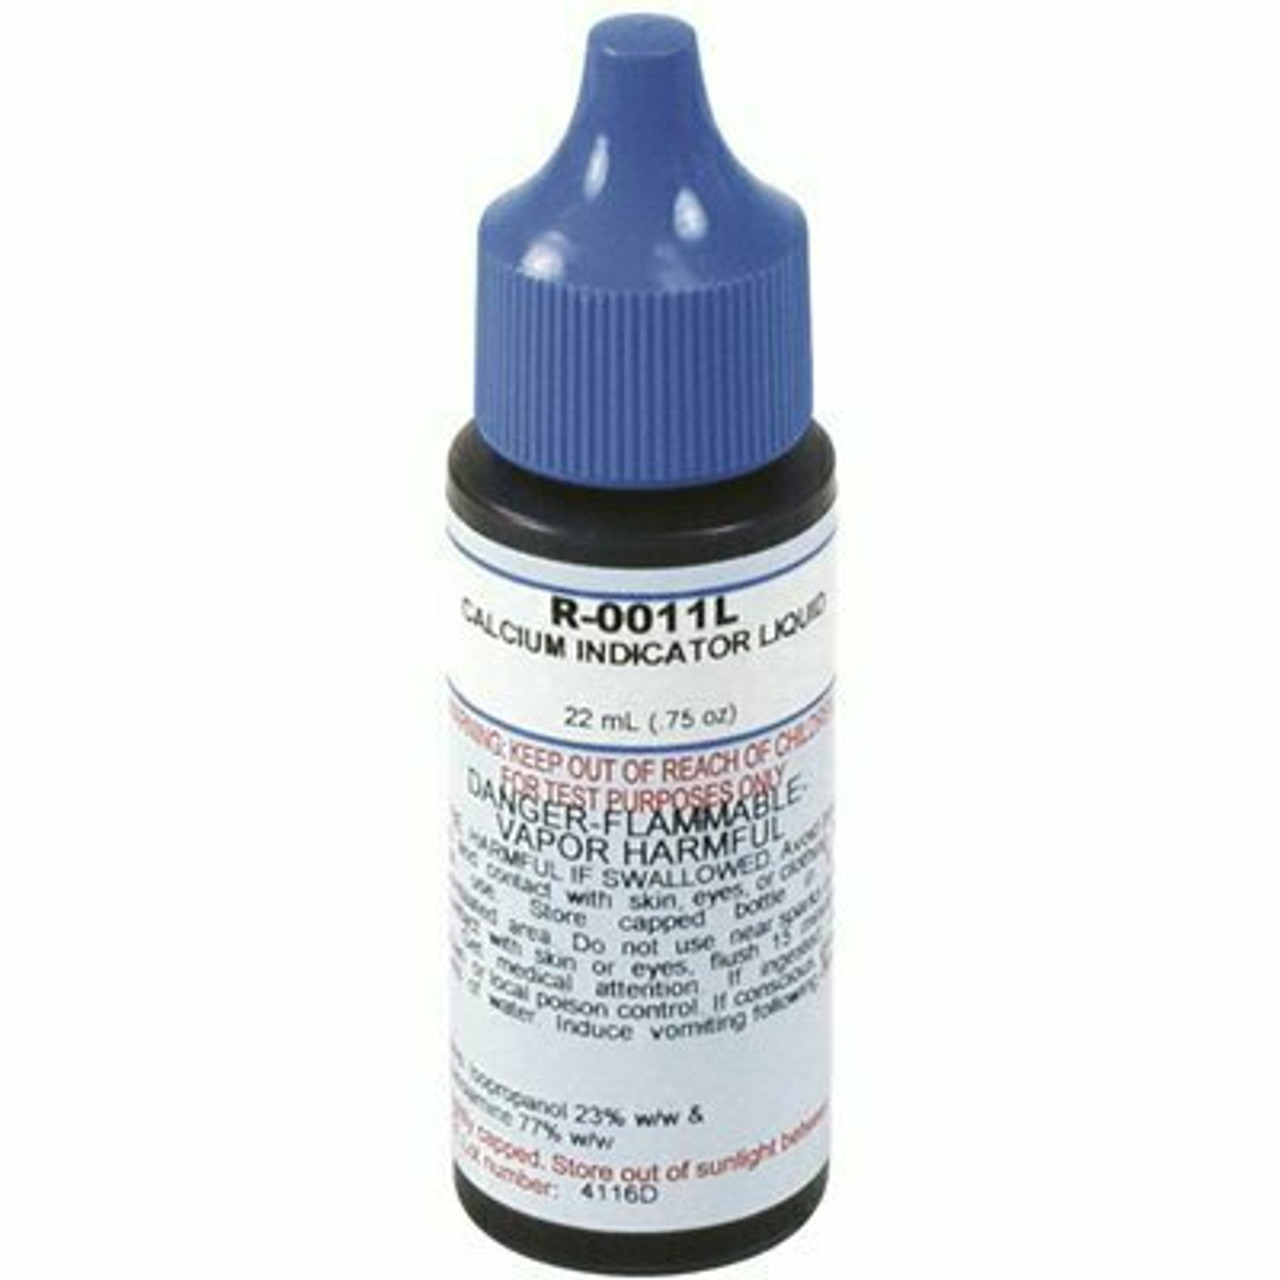 Taylor 3/4 Oz. Test Kit Replacement Reagent Refill Bottles Calcium Indicator Reagent